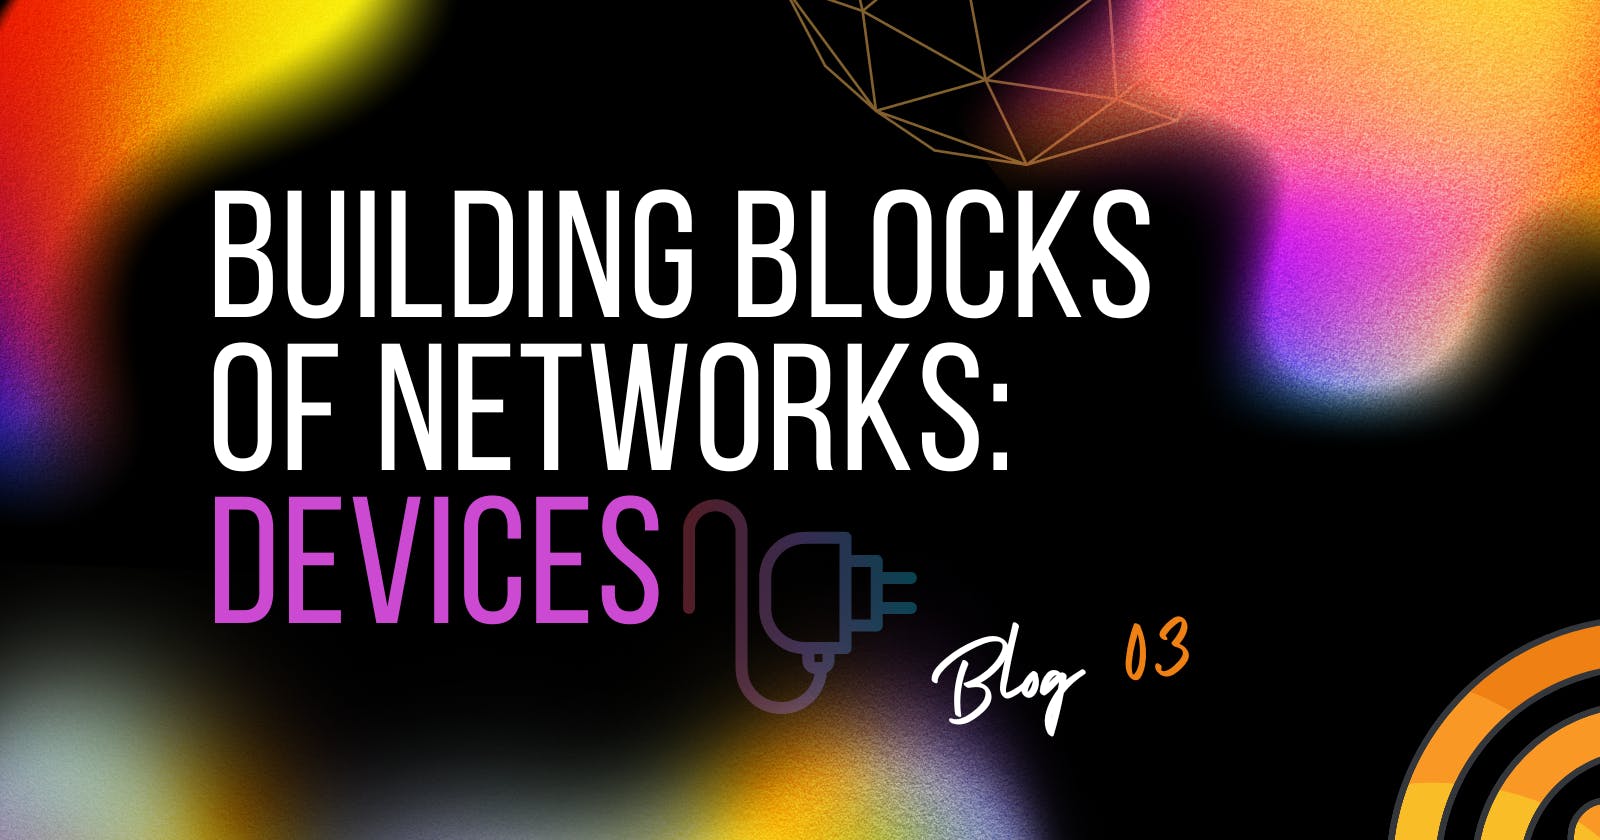 Building Blocks of Networks: Devices